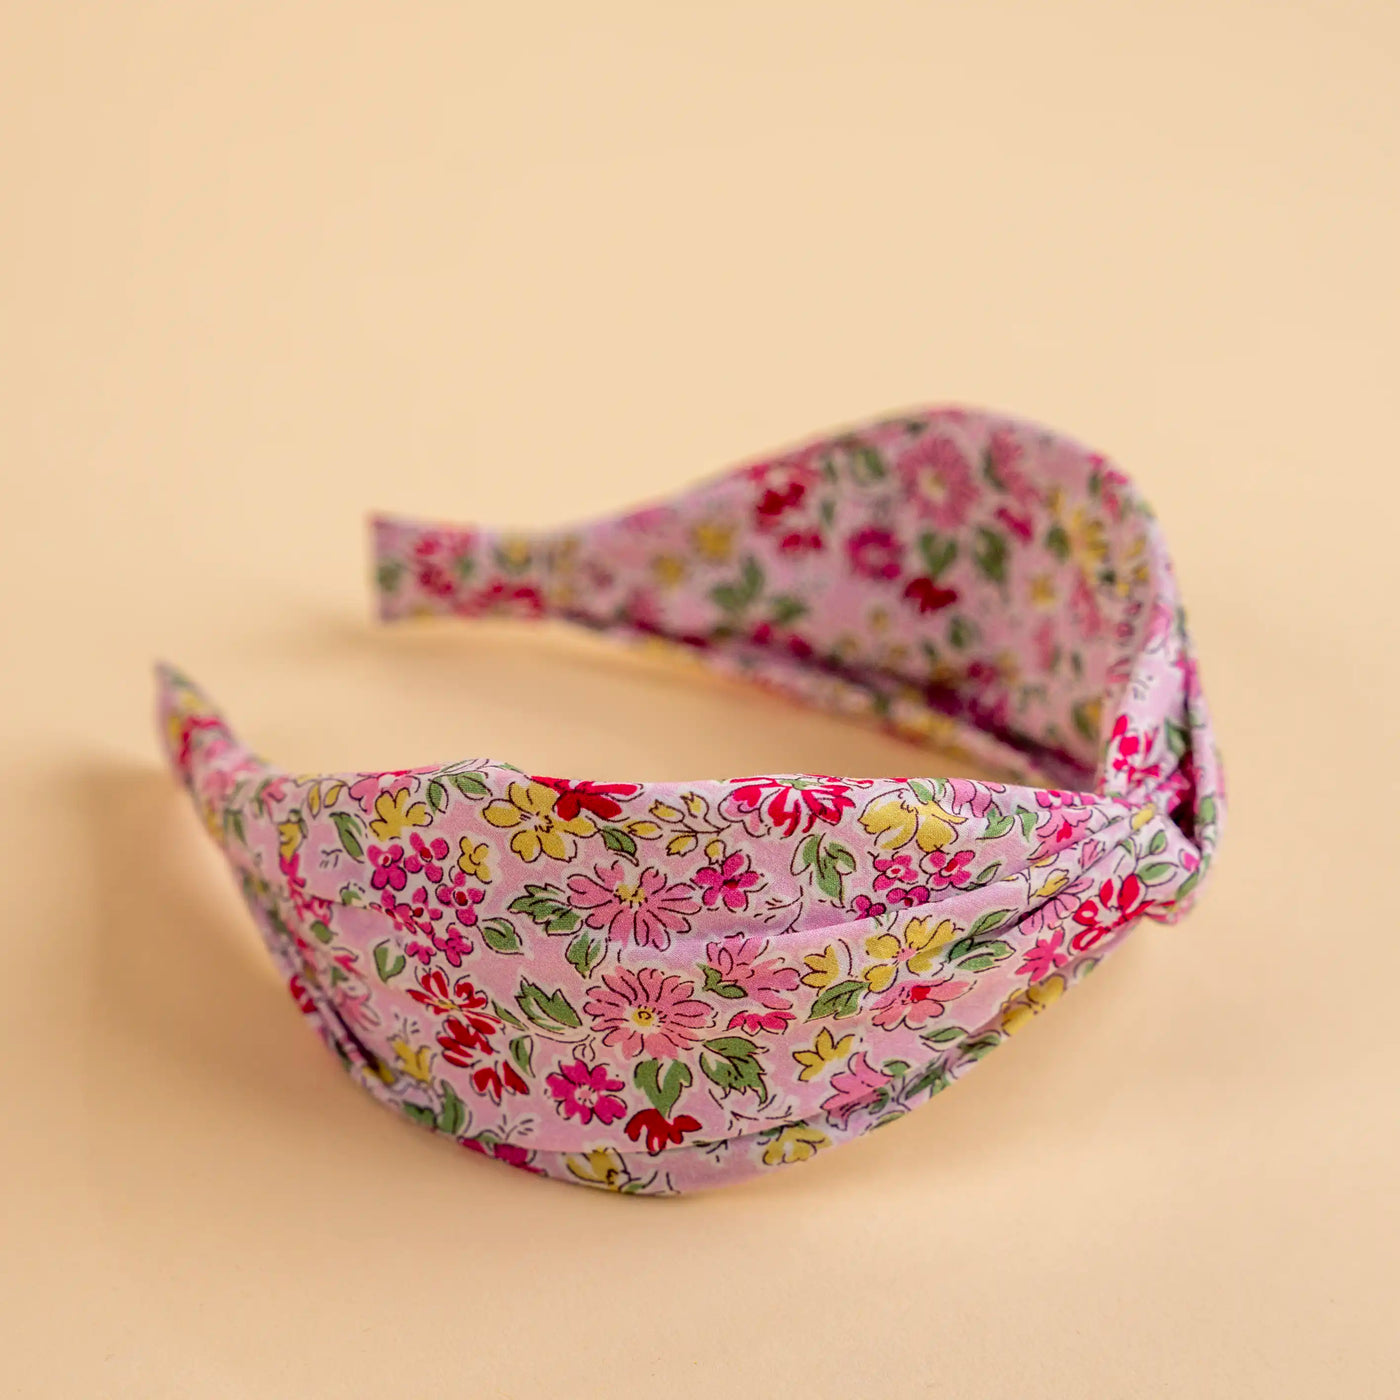 Lucys Pink Poppy Floral Headband. Light pink background with pink and yellow flowers. Side view.